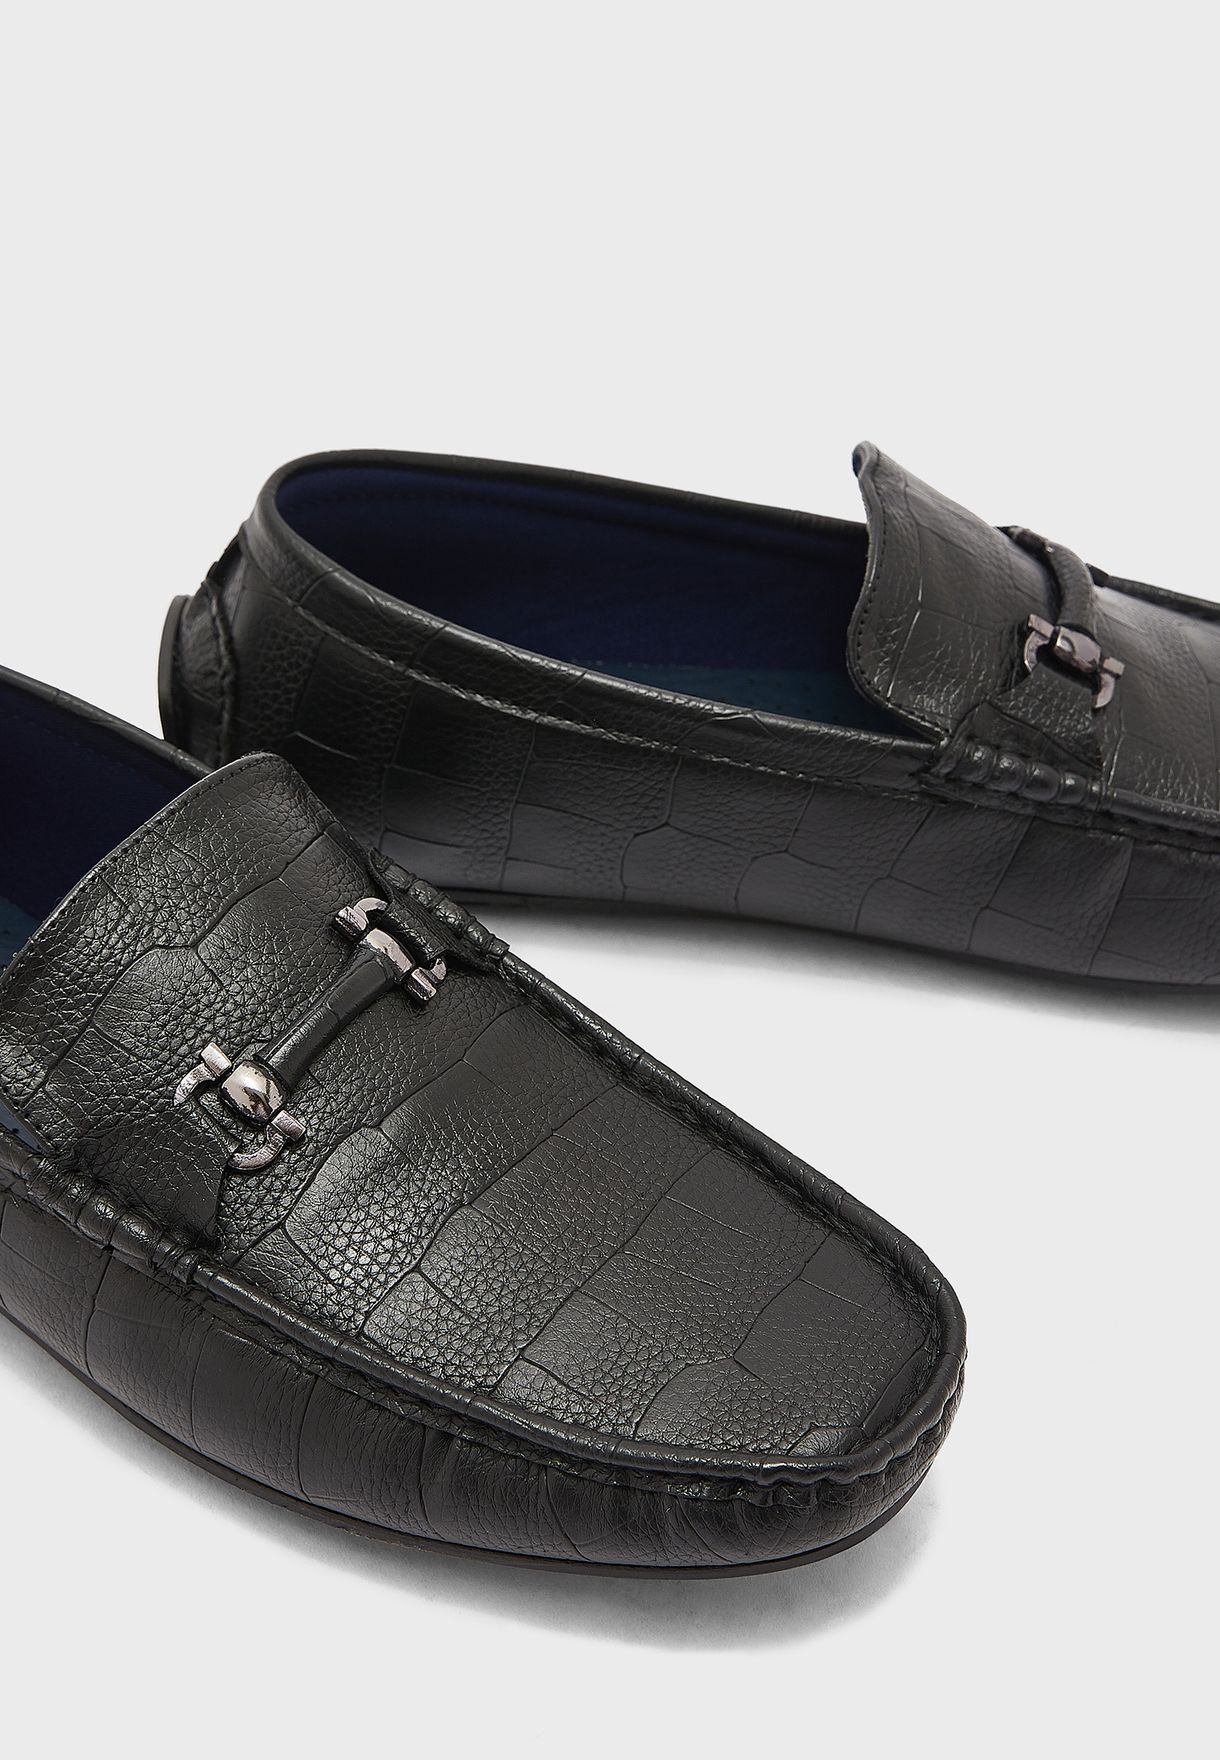 Buckle Details Loafers